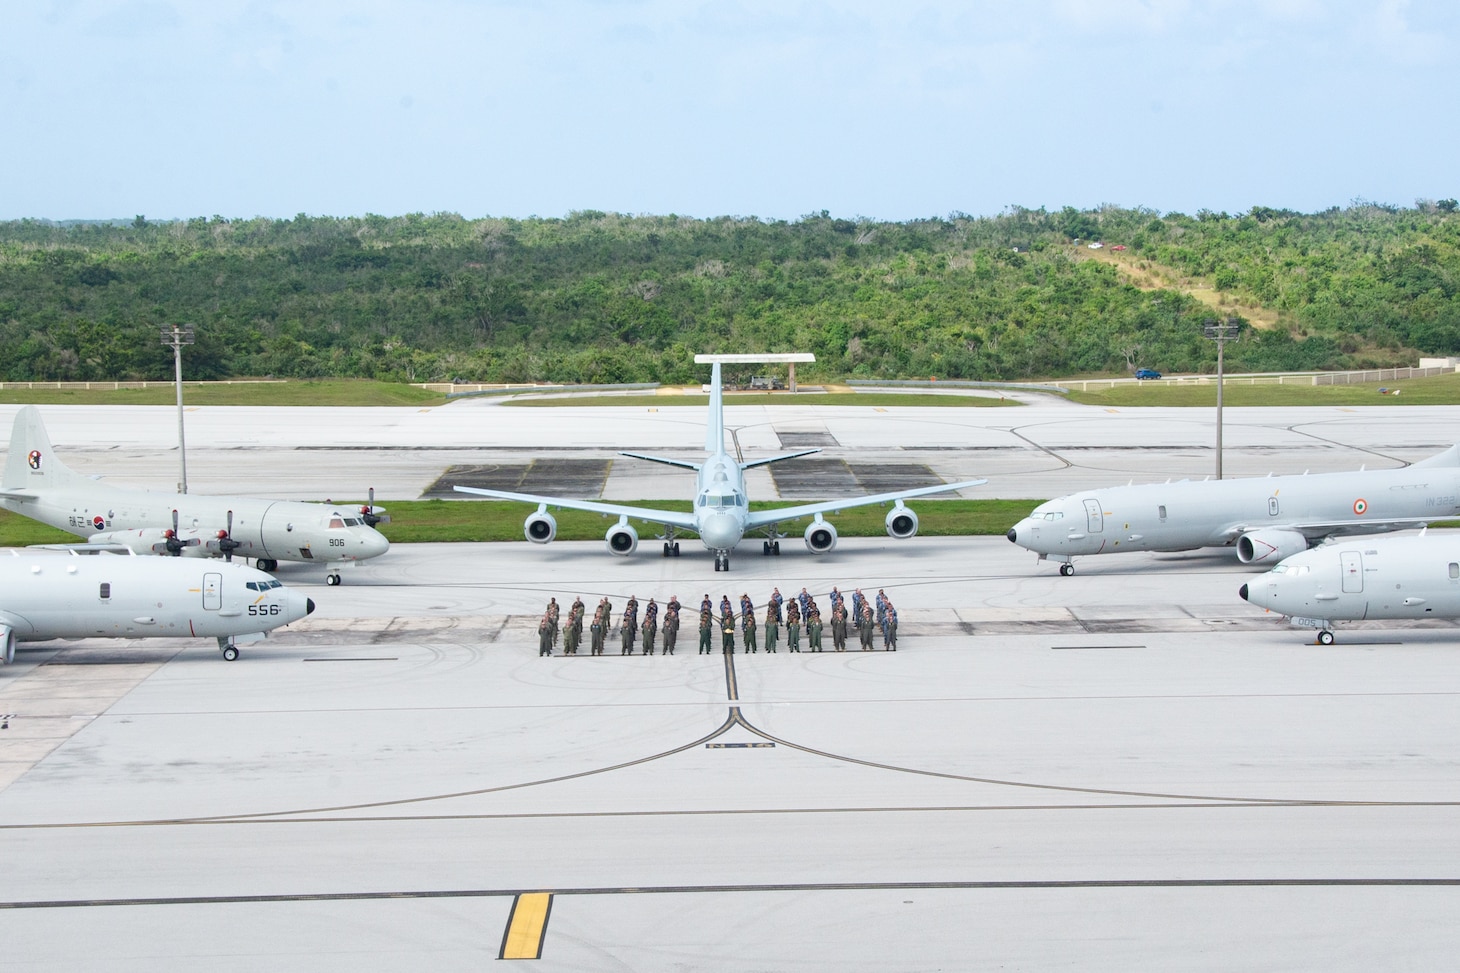 240118-N-LN243-1047 ANDERSEN AIR FORCE BASE, Guam (Jan. 18, 2024)

Members from Royal Australian Air Force, Indian Navy, Japan Maritime Self-Defense Force, Republic of Korea Navy, and the U.S. Navy participate in exercise Sea Dragon 2024 at Anderson Air Force Base, Jan. 18. Exercise Sea Dragon is a multilateral ASW exercise located in Guam, hosted by CTF-72. Nations in attendance this year include Australia, India, Japan and South Korea. (U.S. Navy Photo by Mass Communication Specialist 2nd Class Marques Franklin)